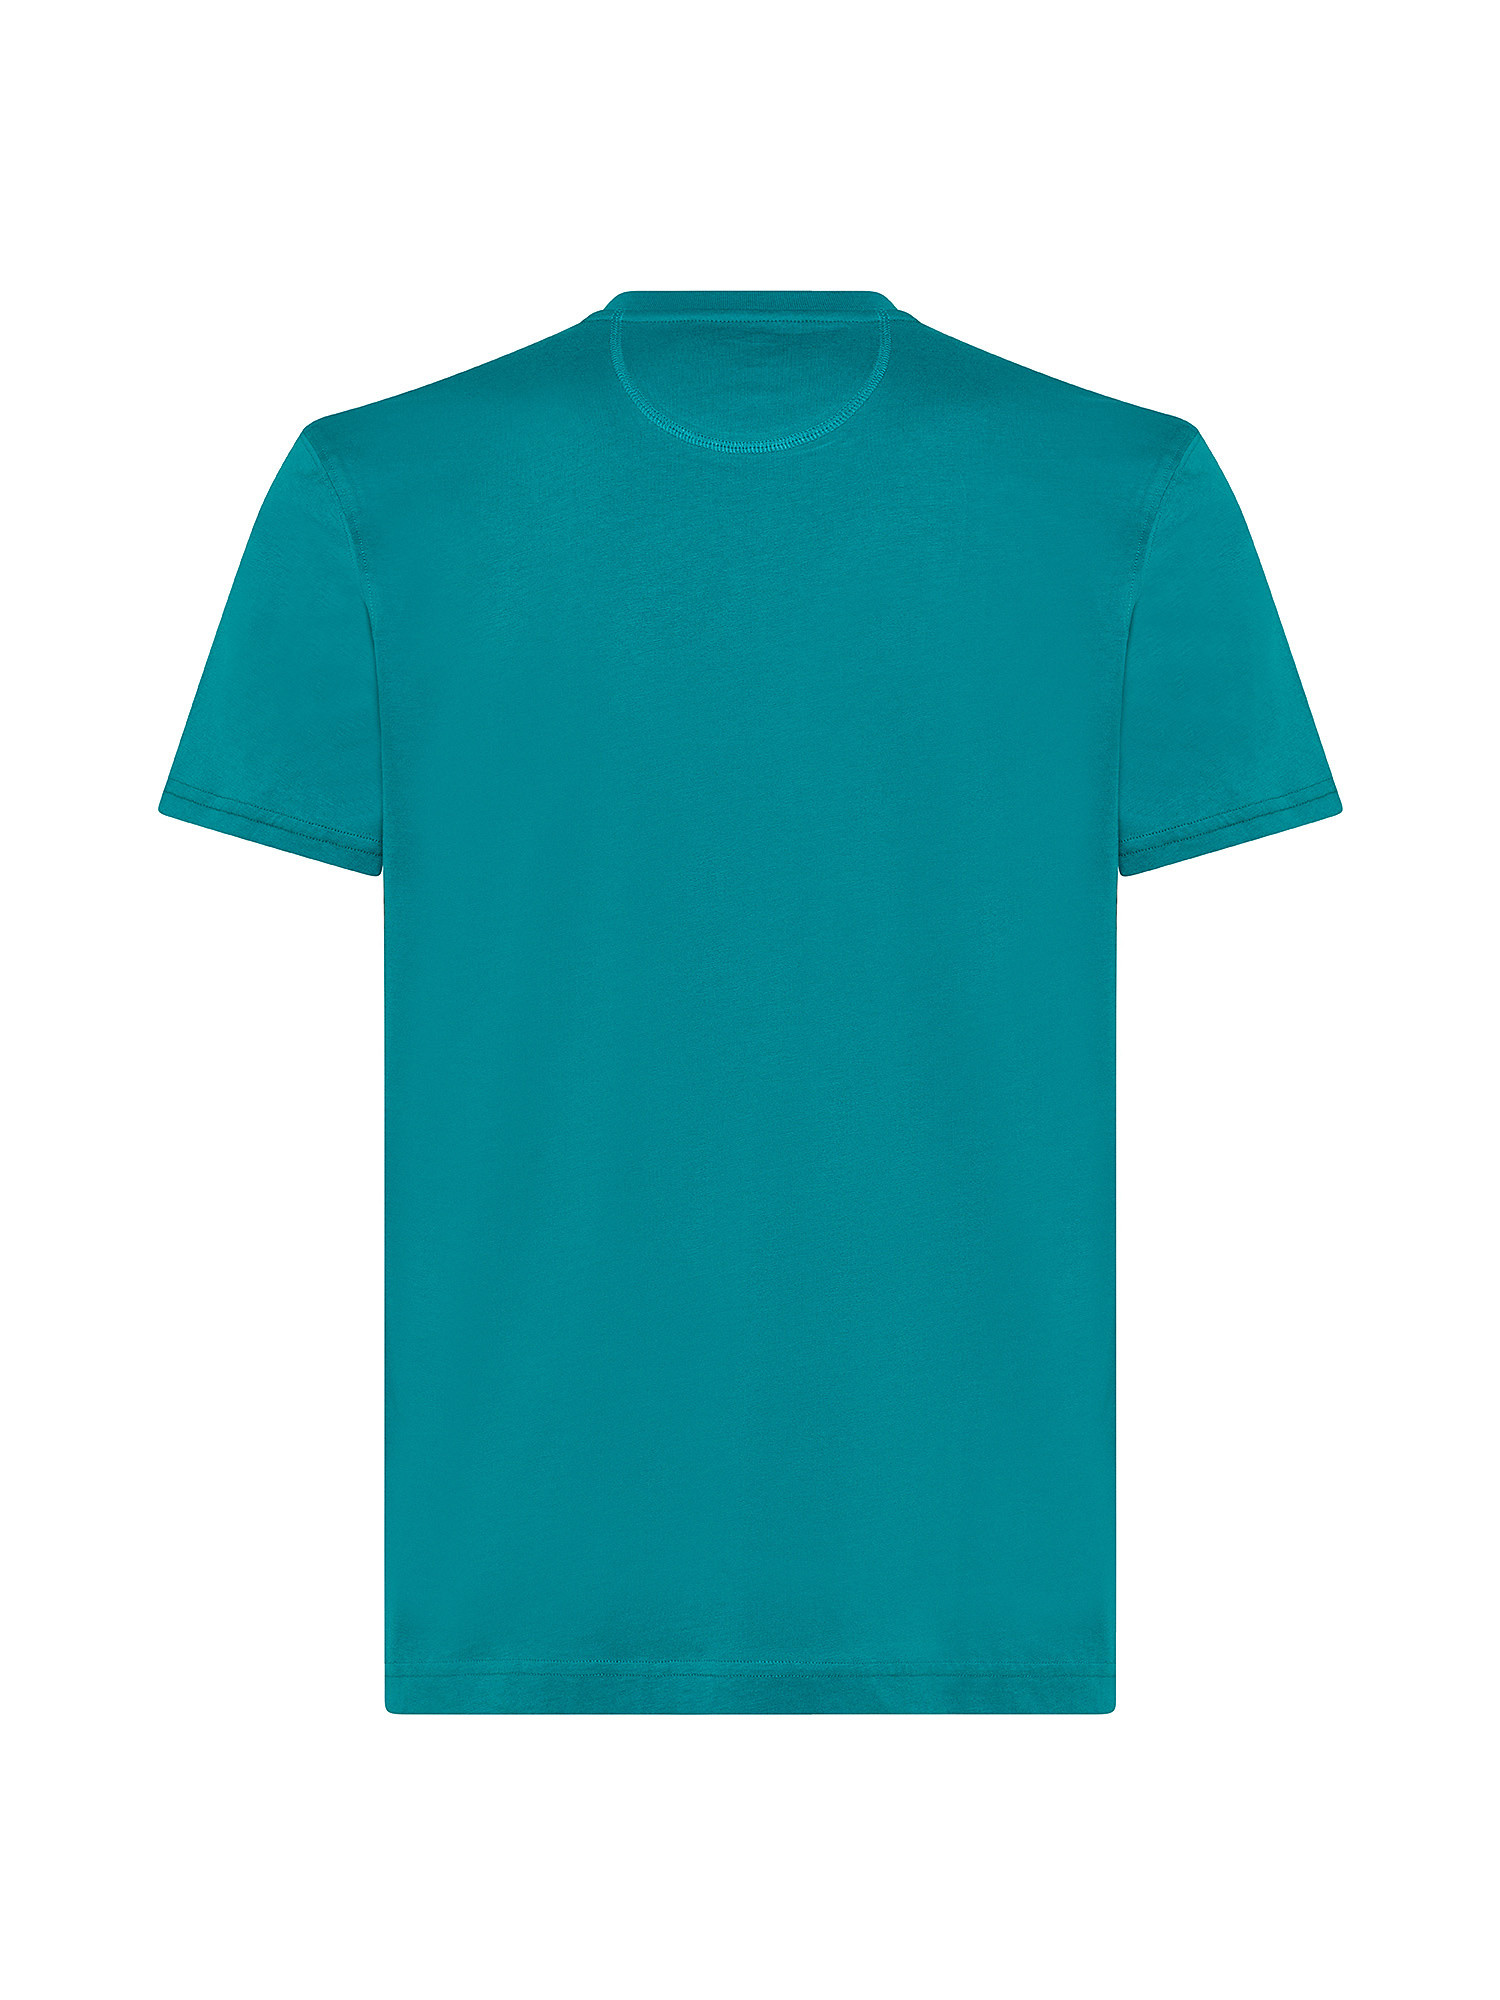 La Martina - Short-sleeved T-shirt in jersey cotton, Green, large image number 1